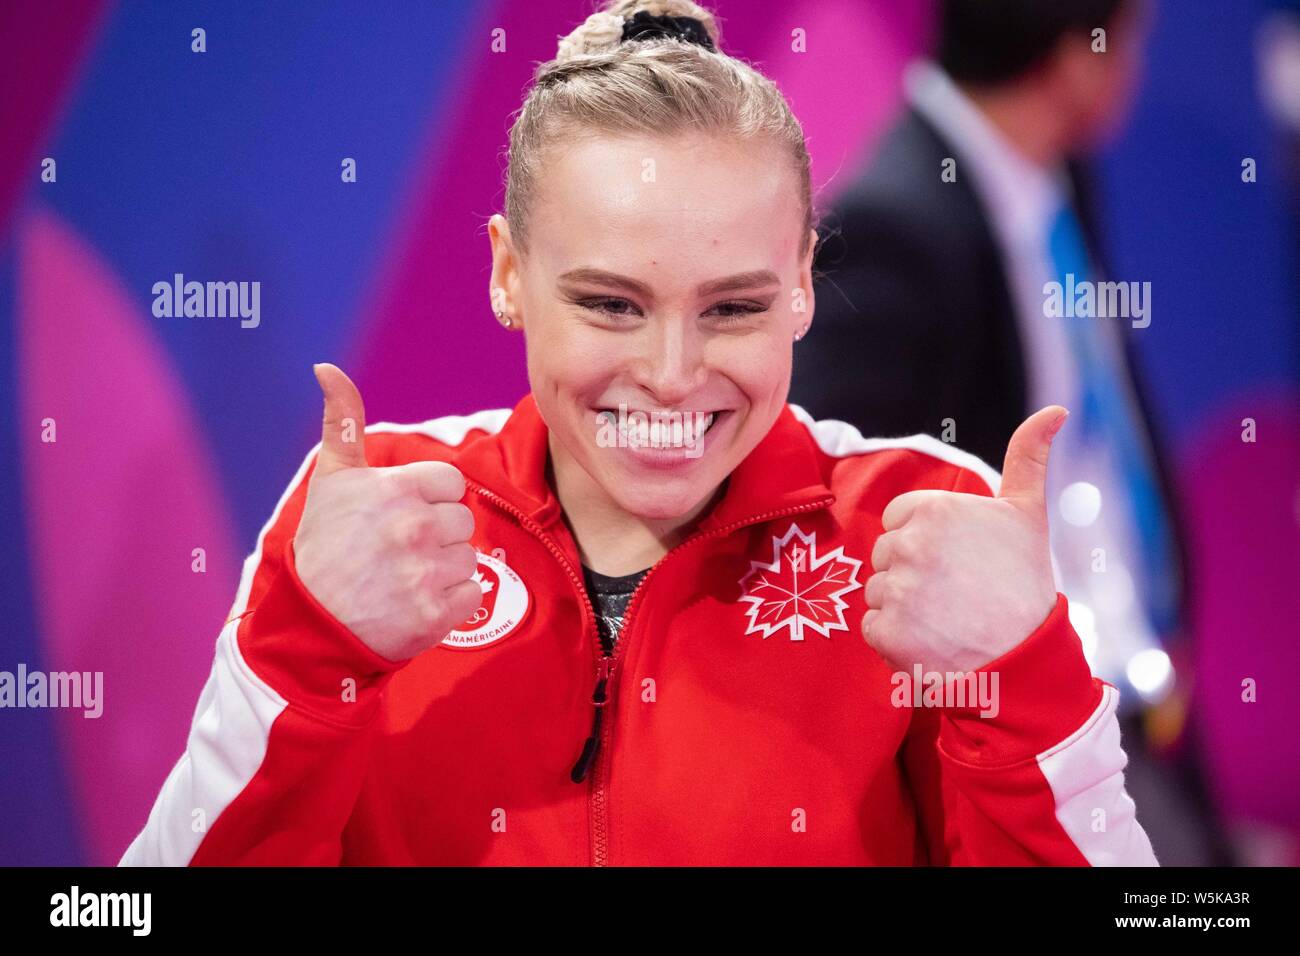 Lima, Peru. 29th July, 2019. Ellie Black of Canada gives the thumbs up after winning the gold medal at the Pan American Games Artistic Gymnastics Women's All Around final at Polideportivo Villa el Salvador in Lima, Peru. Daniel Lea/CSM/Alamy Live News Stock Photo